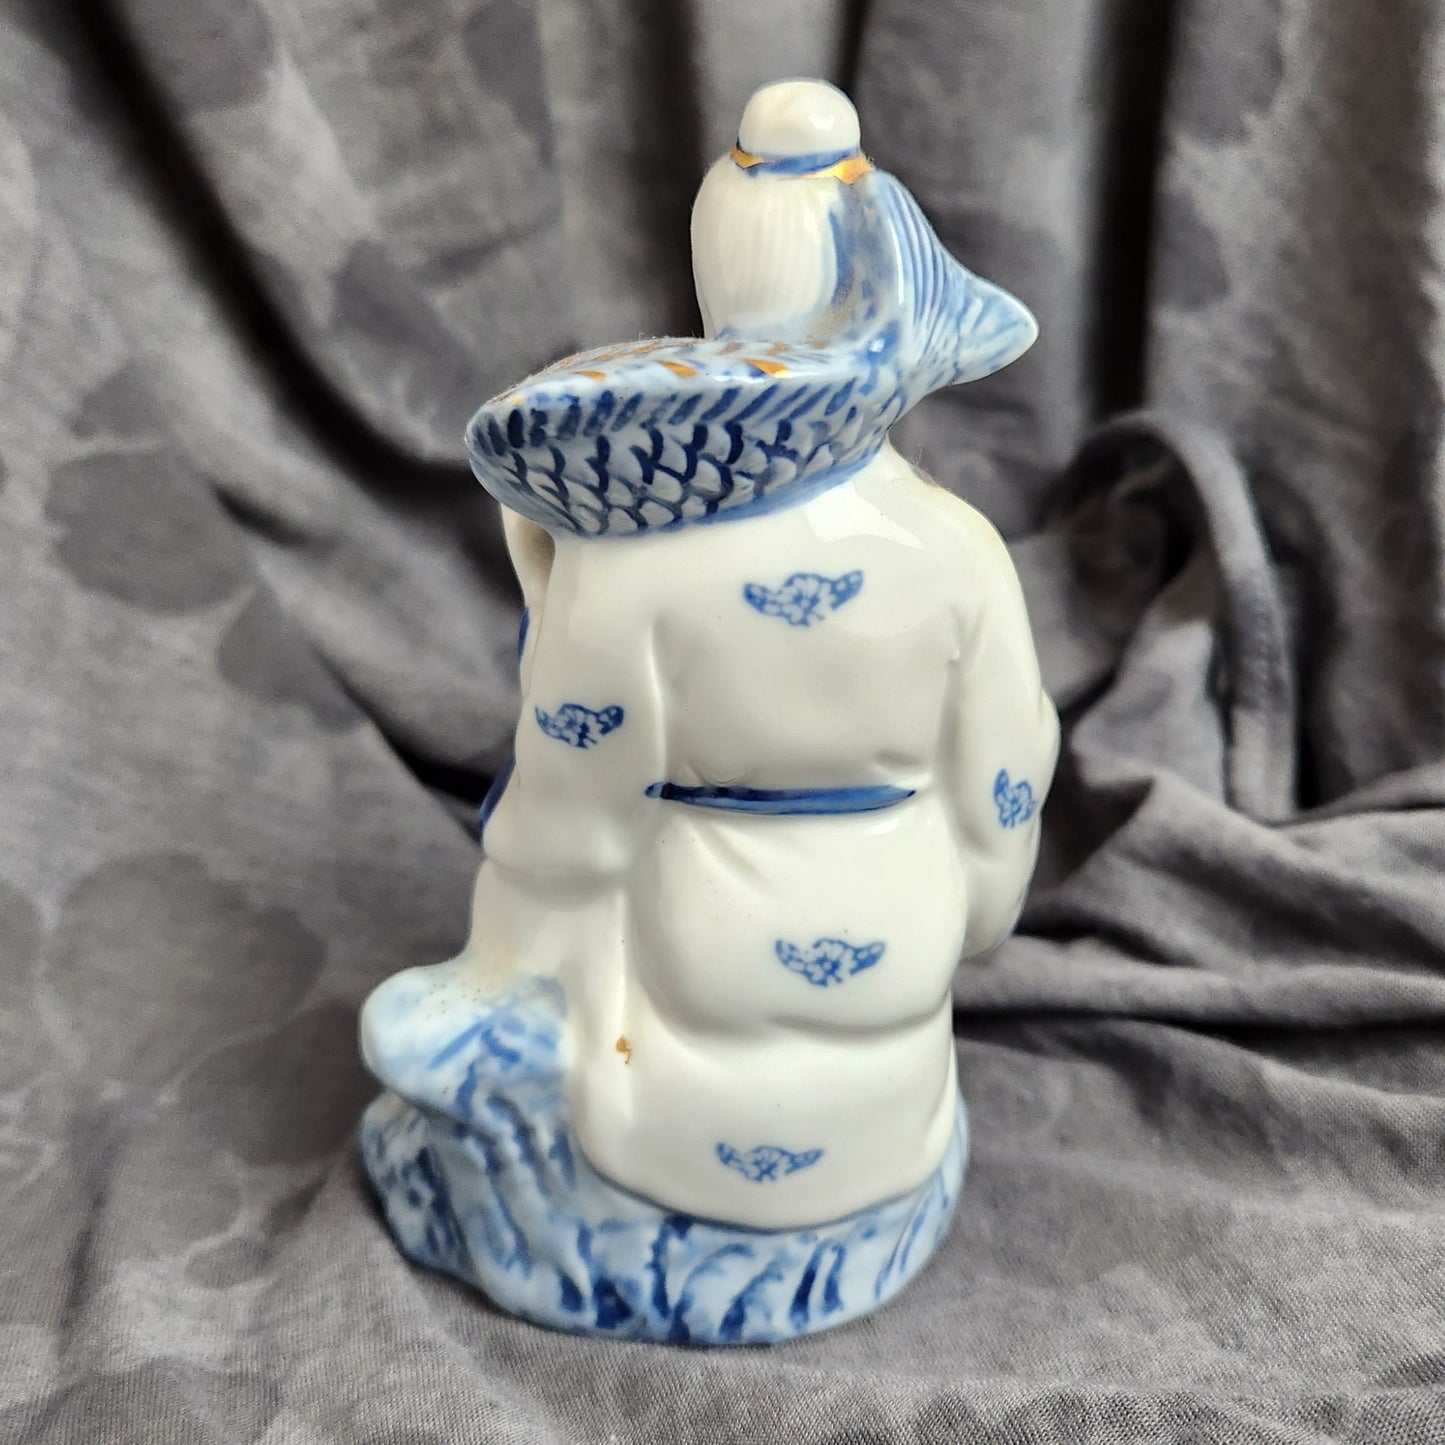 Pair of Figurines Chinese Porcelain Art, An Old Fisherman - Vintage